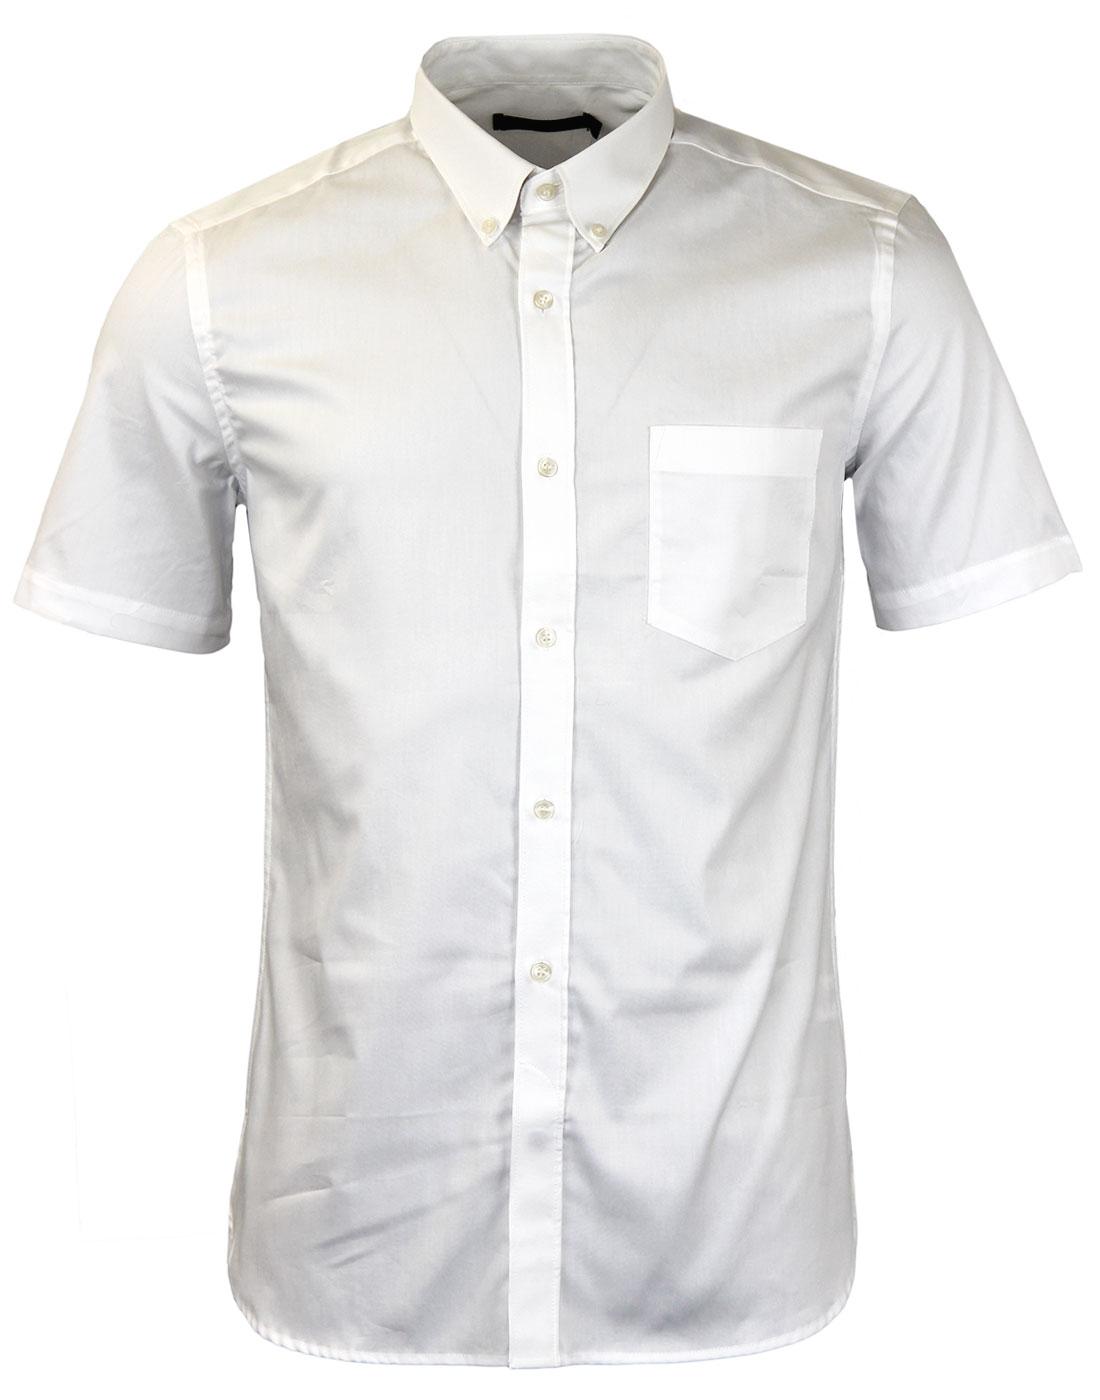 FRENCH CONNECTION Retro Mod SS Oxford Shirt WHITE